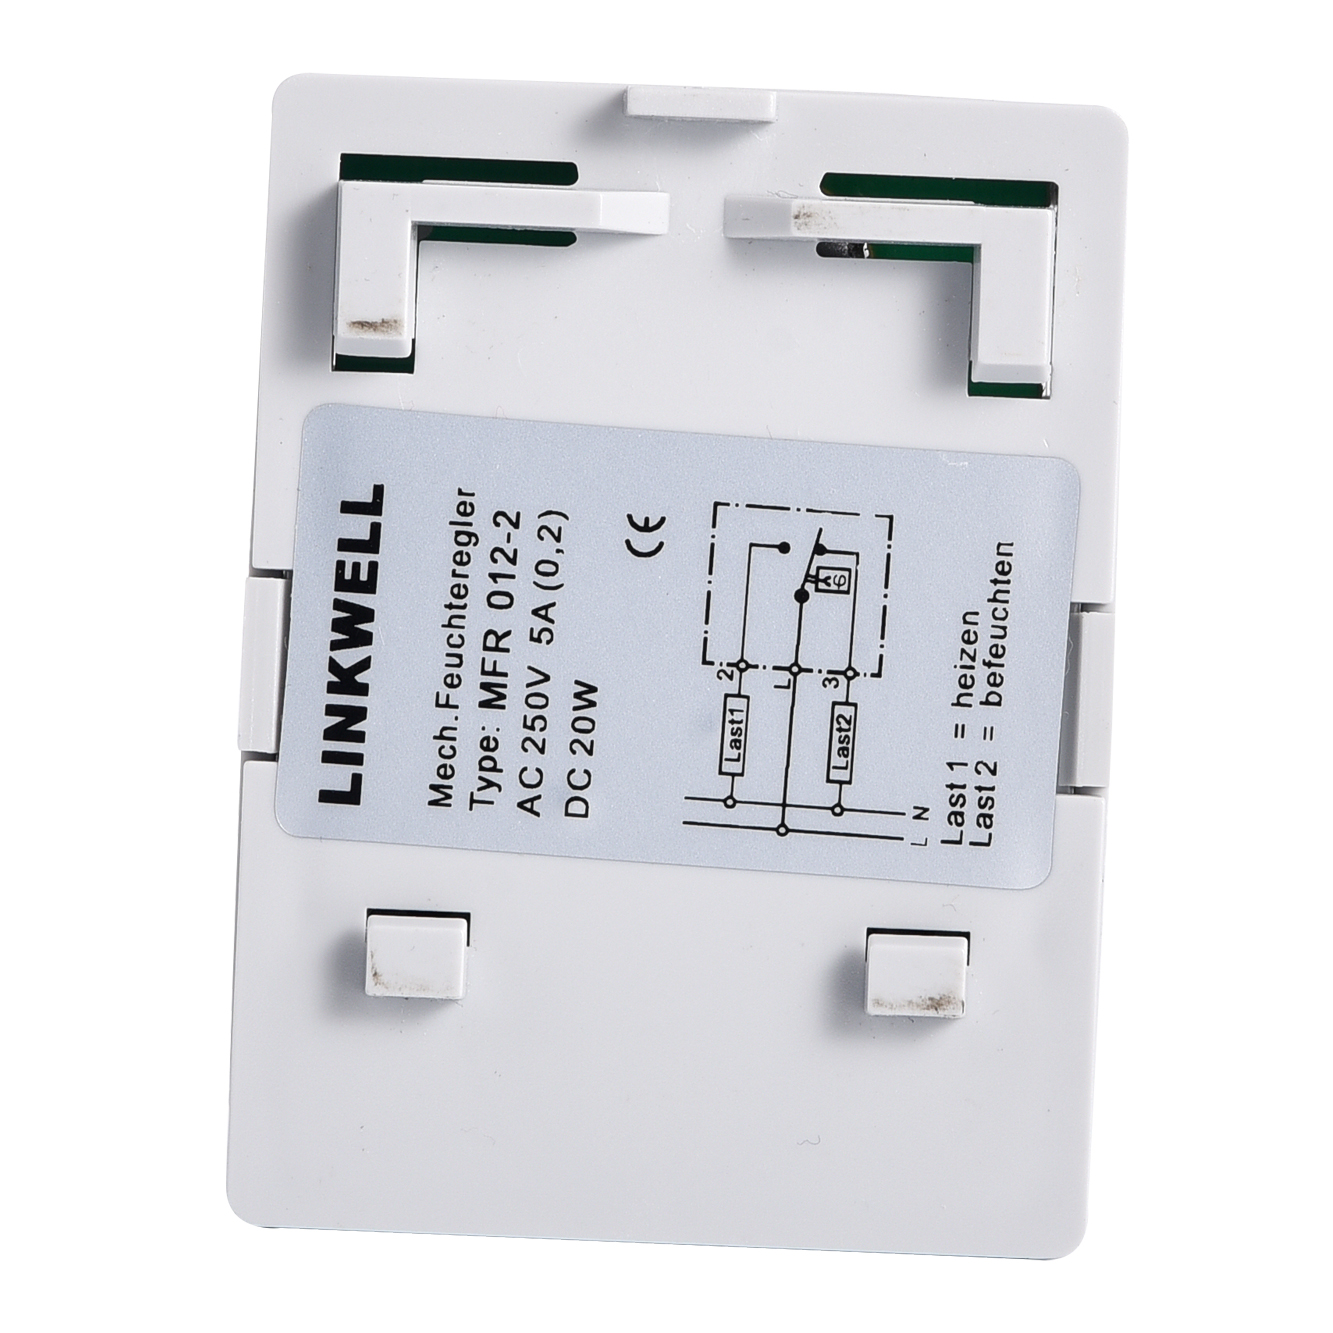 Industrial mechanical humidity controller